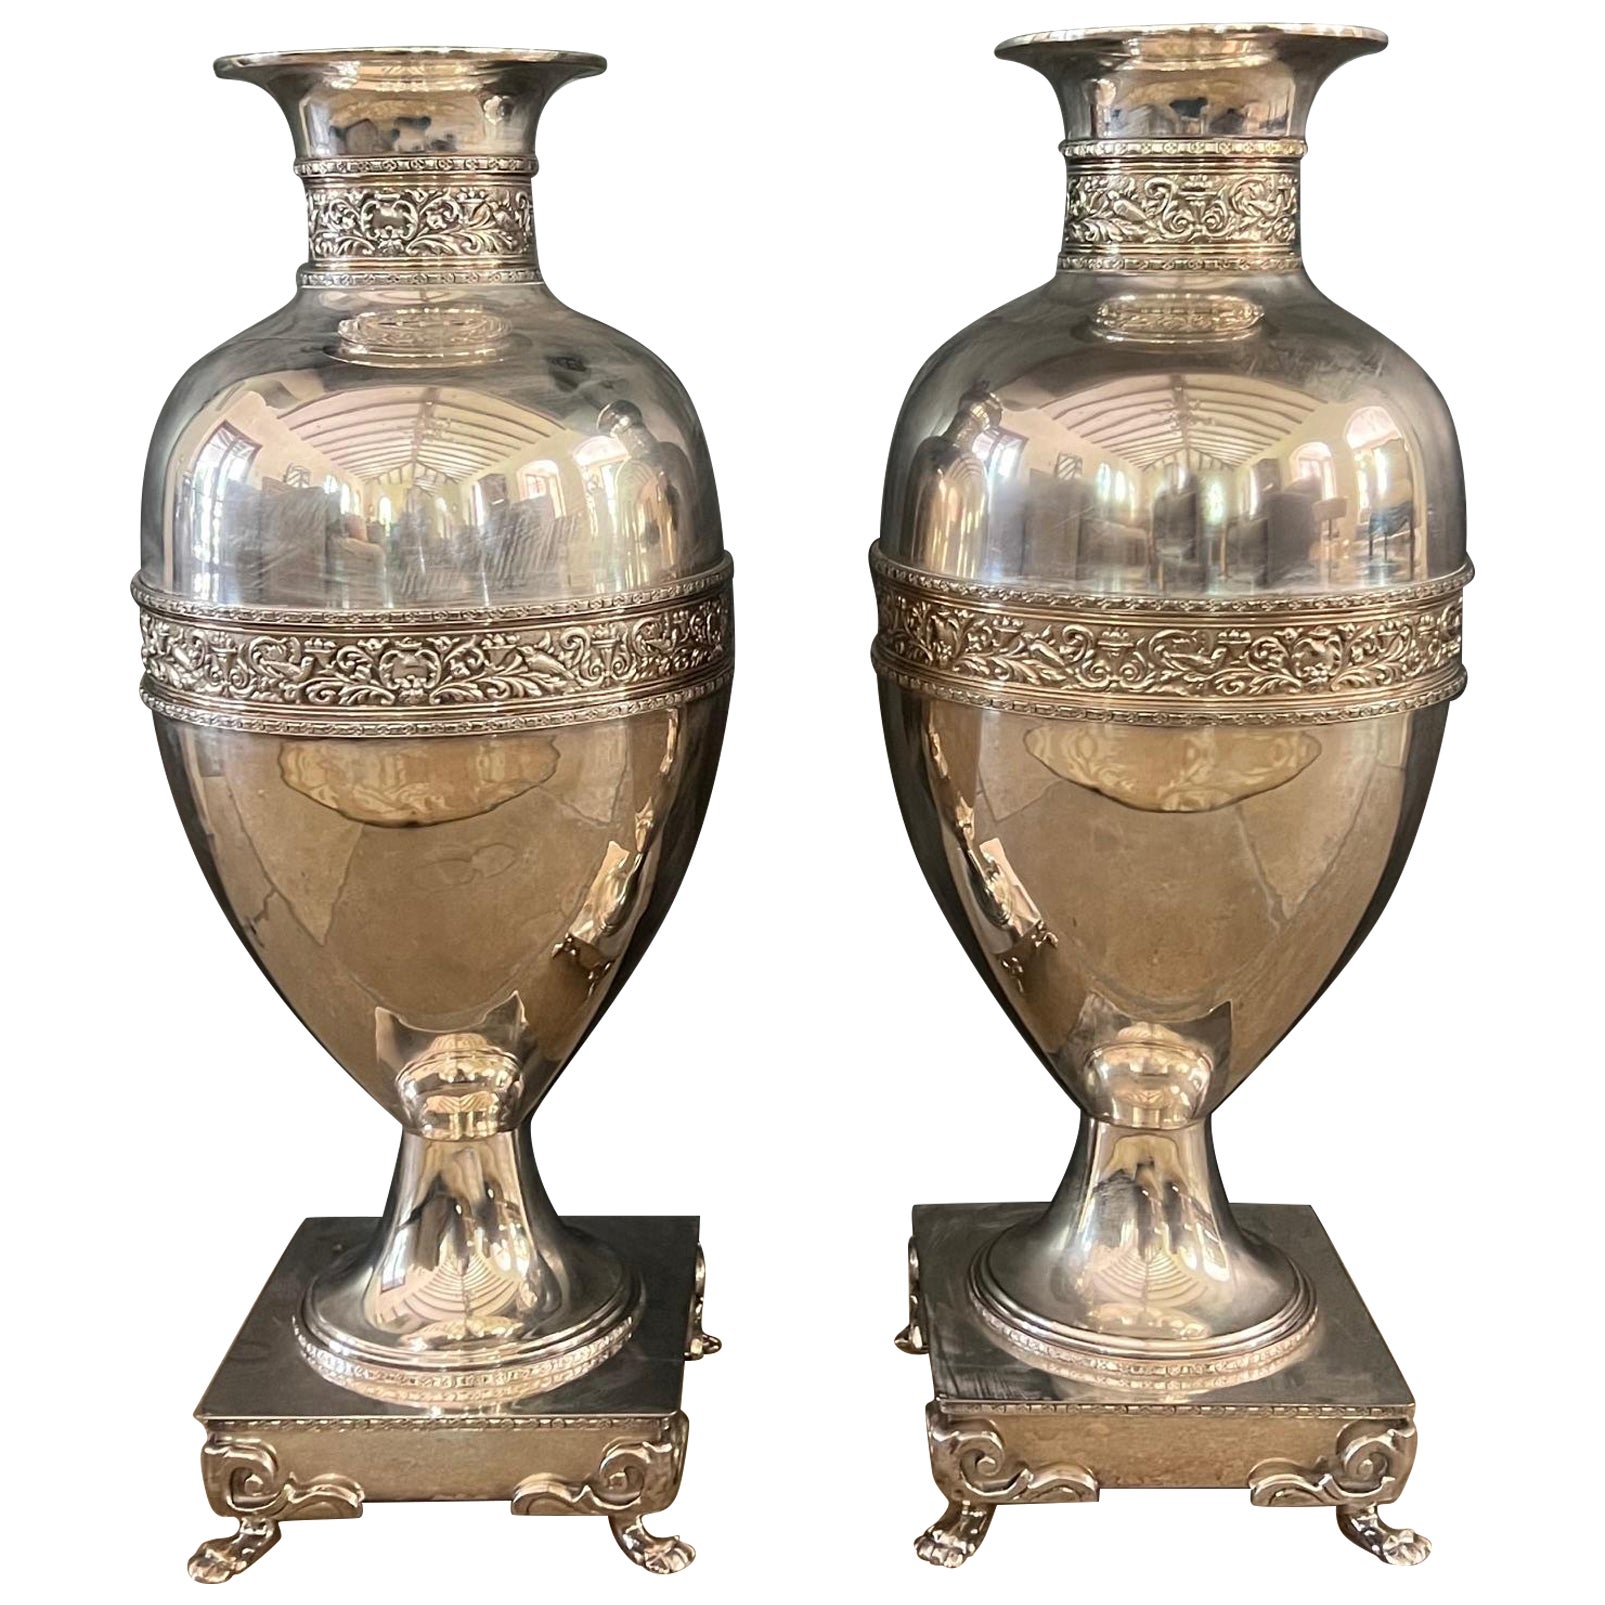 Empire Revival Vases and Vessels